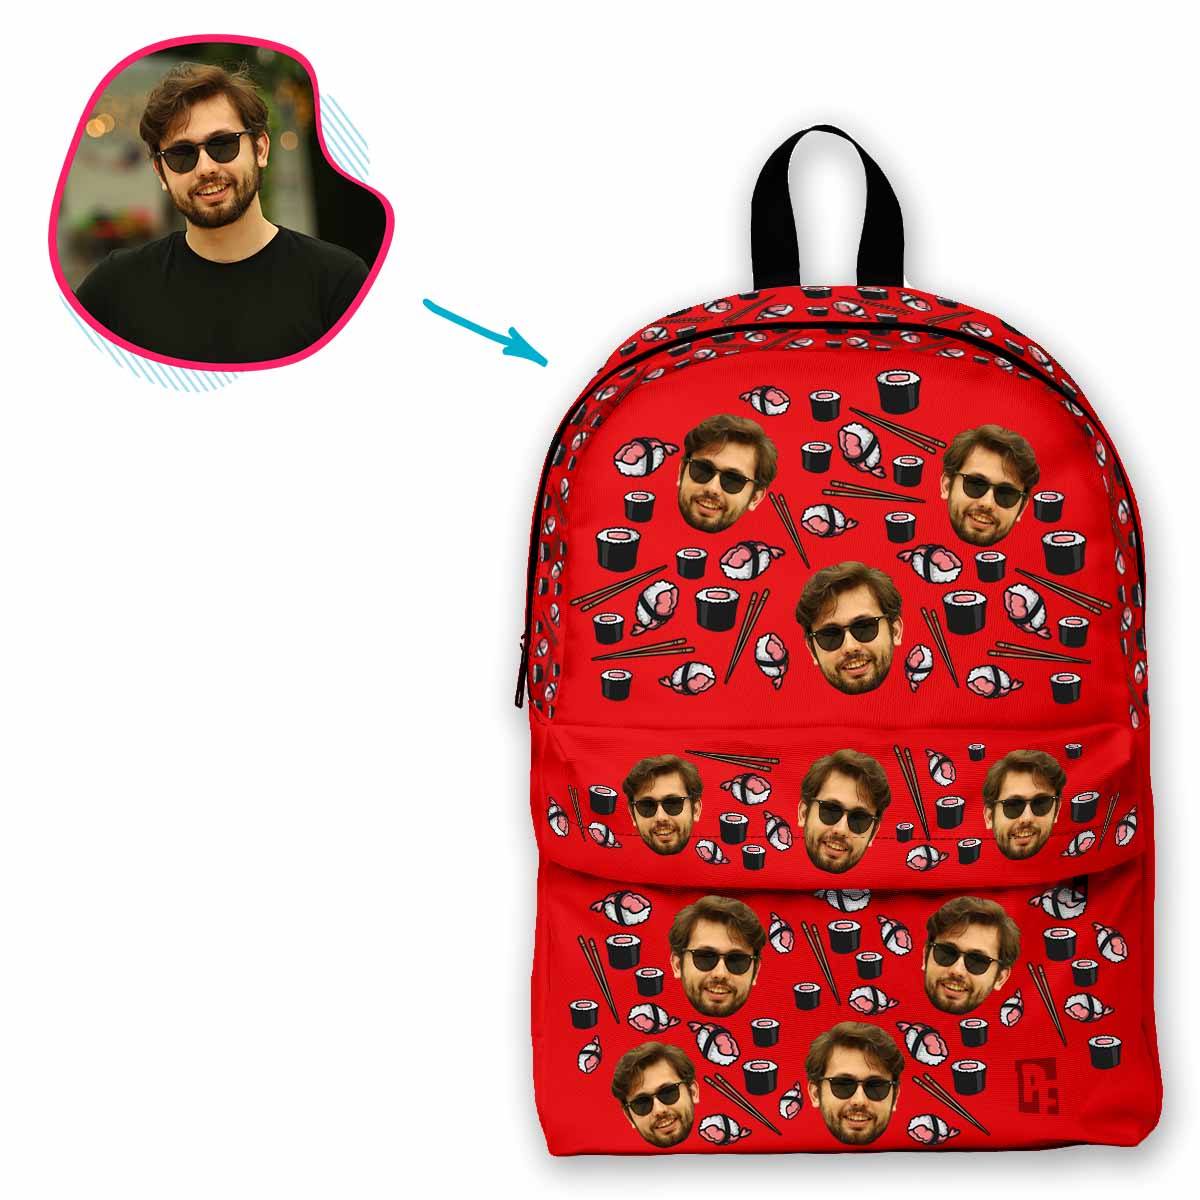 red Sushi classic backpack personalized with photo of face printed on it